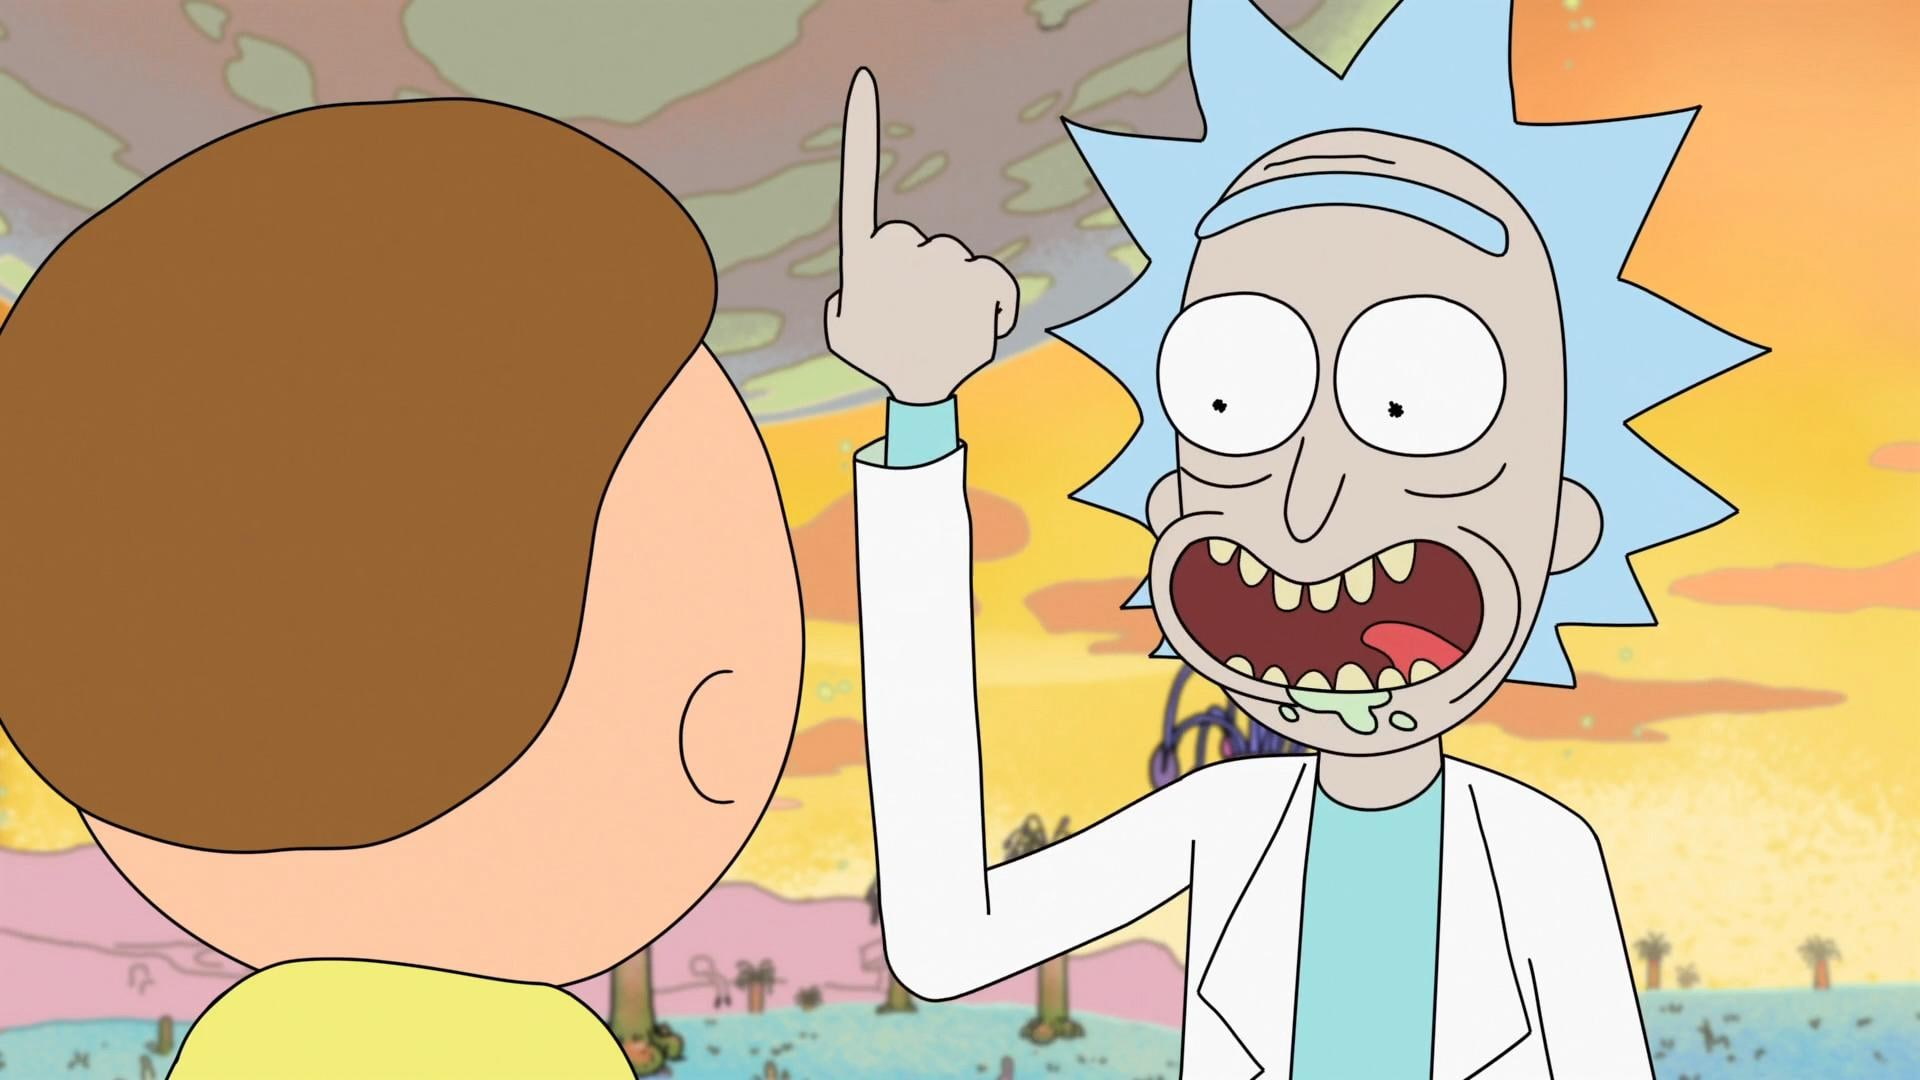 rick and morty, child, men, smiling, childhood, cartoon, happiness